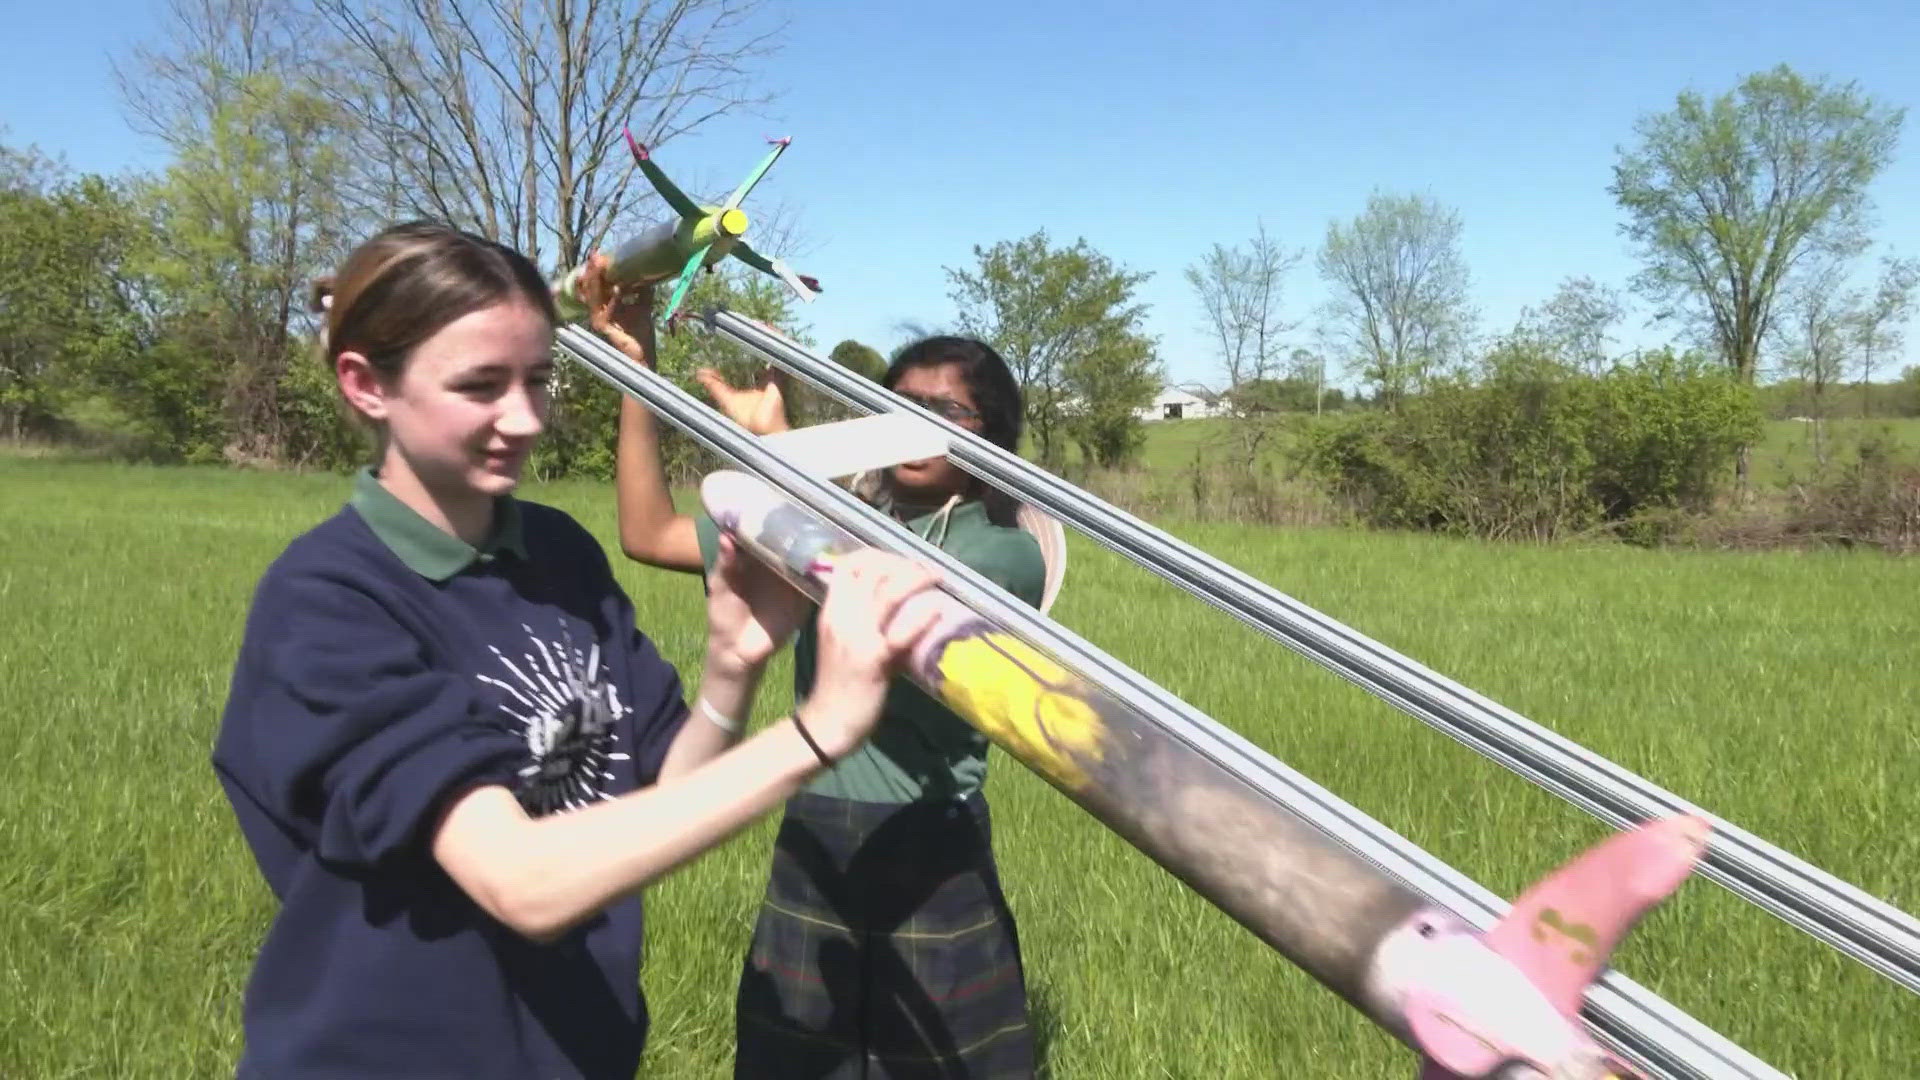 Immaculate Heart of Mary School in Cuyahoga Falls has once again qualified for the national finals in a rocket challenge.